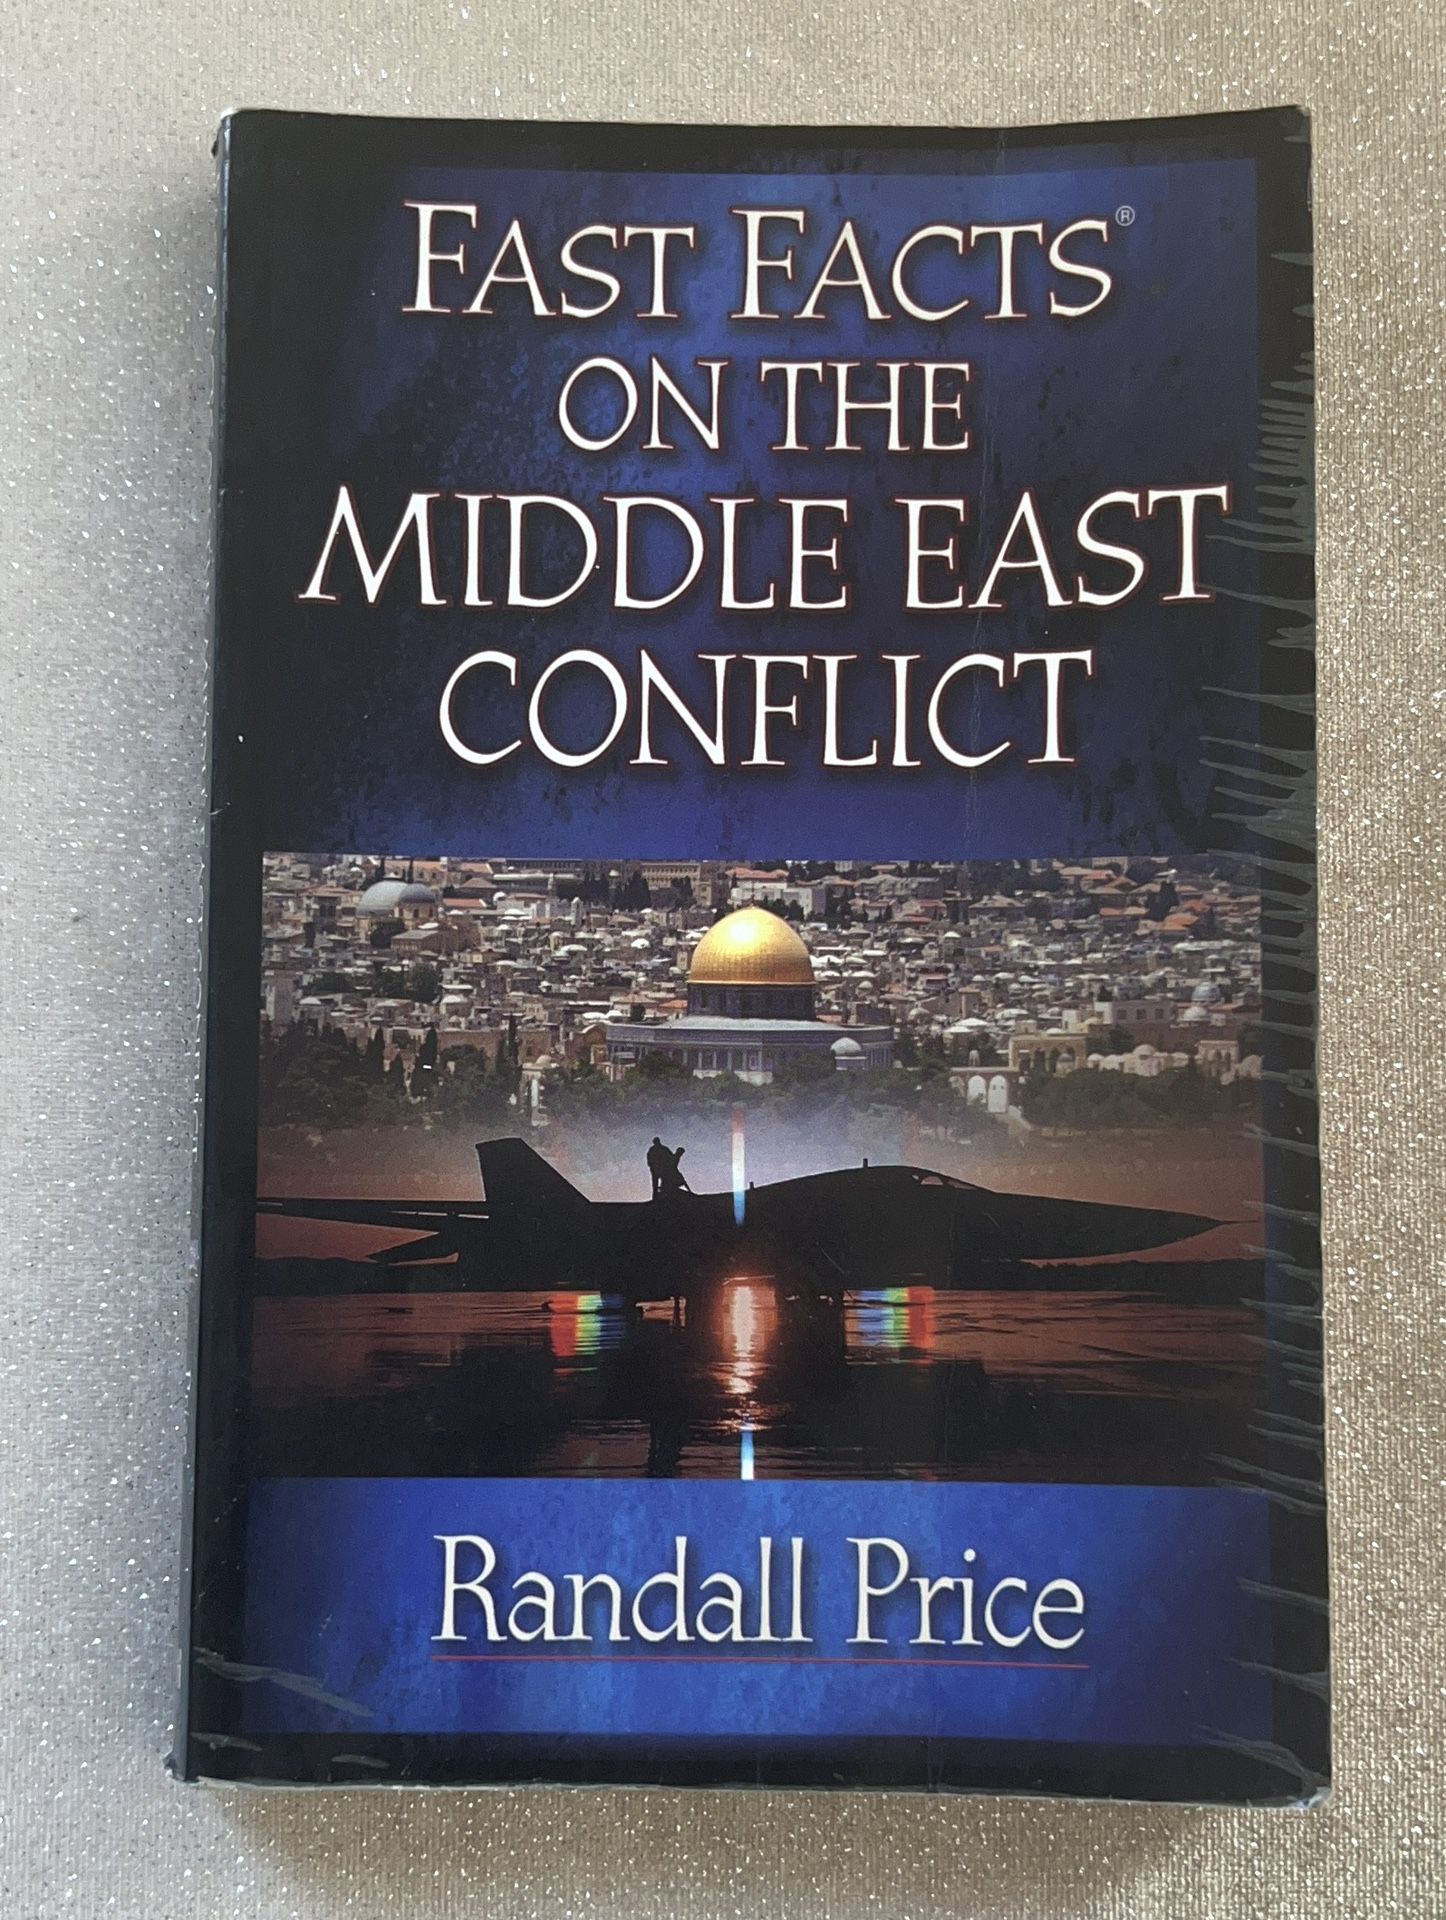 Fast Facts on the Middle East Conflict by Randall Price